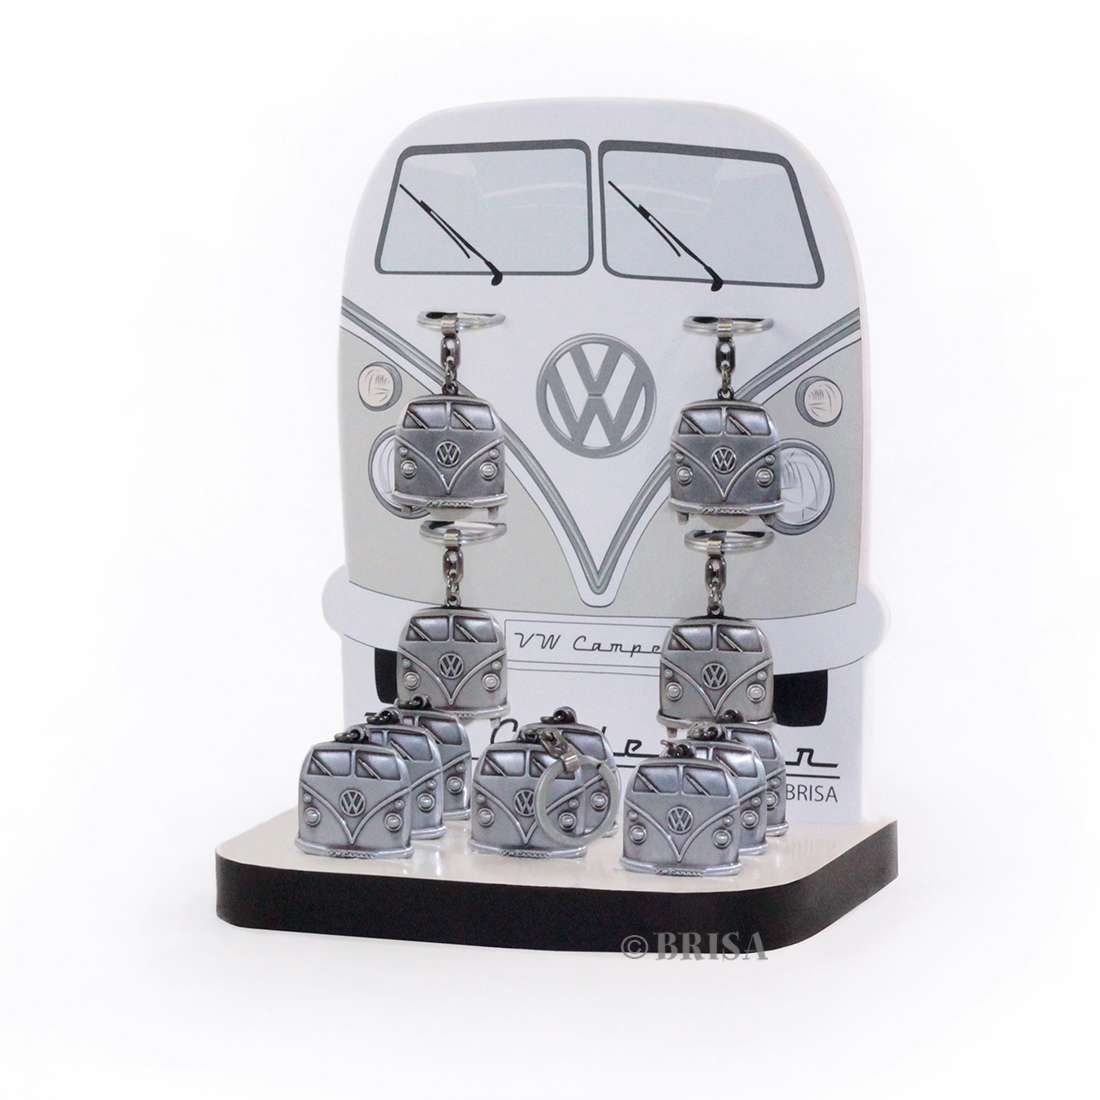 VW T1 BUS KEY HANGER WITH SHOPPING CAR CHIP IN GIFT BOX, SET OF 12 IN DISPLAY - ANTIQUE SILVER OPTICS